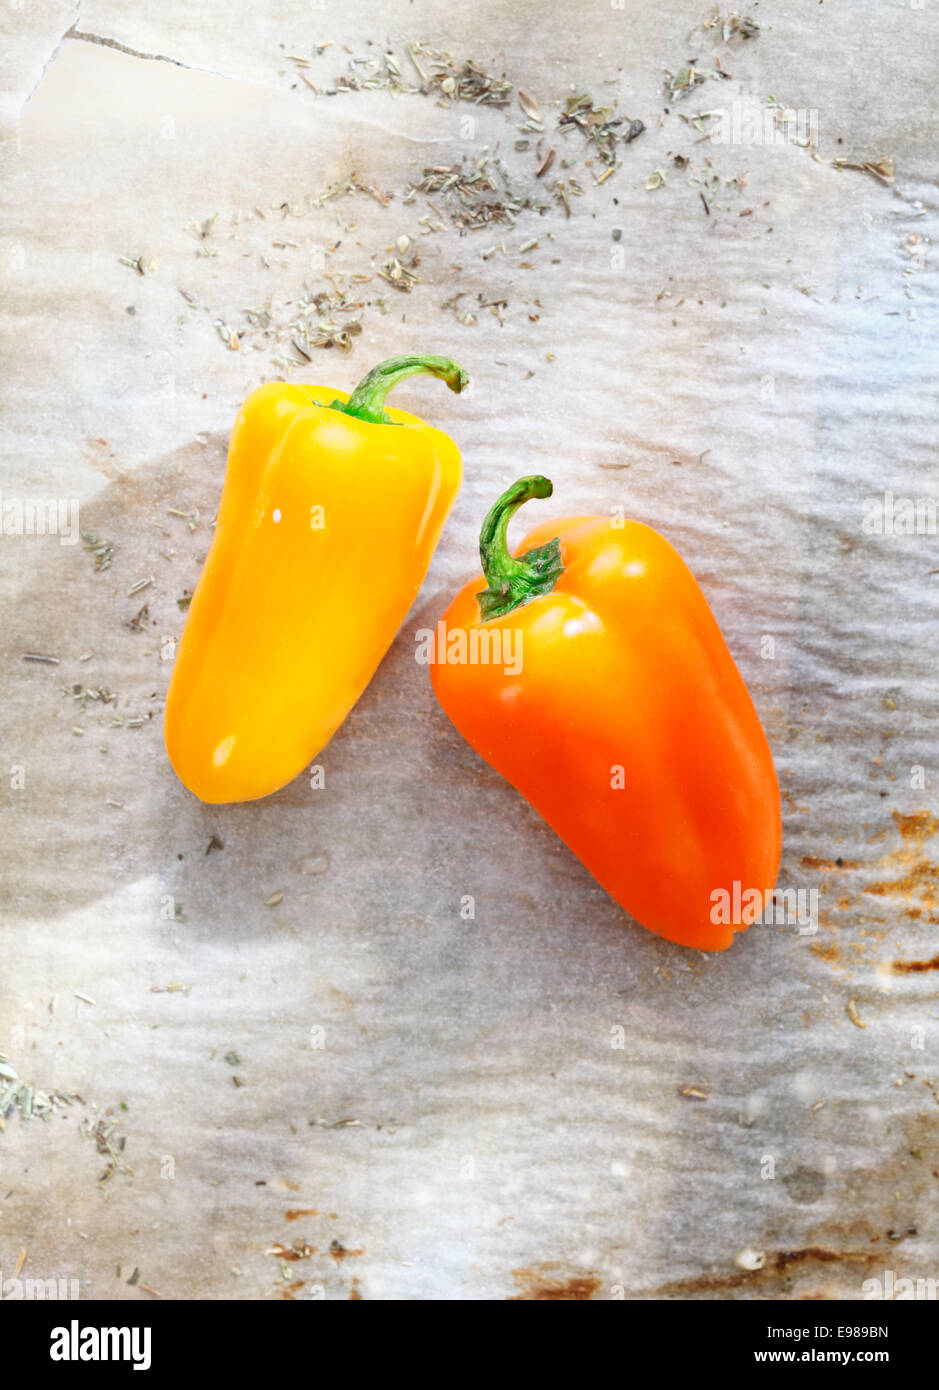 Fresh red bell peppers on a sheet of grungy used wrinkled stained oven paper Stock Photo